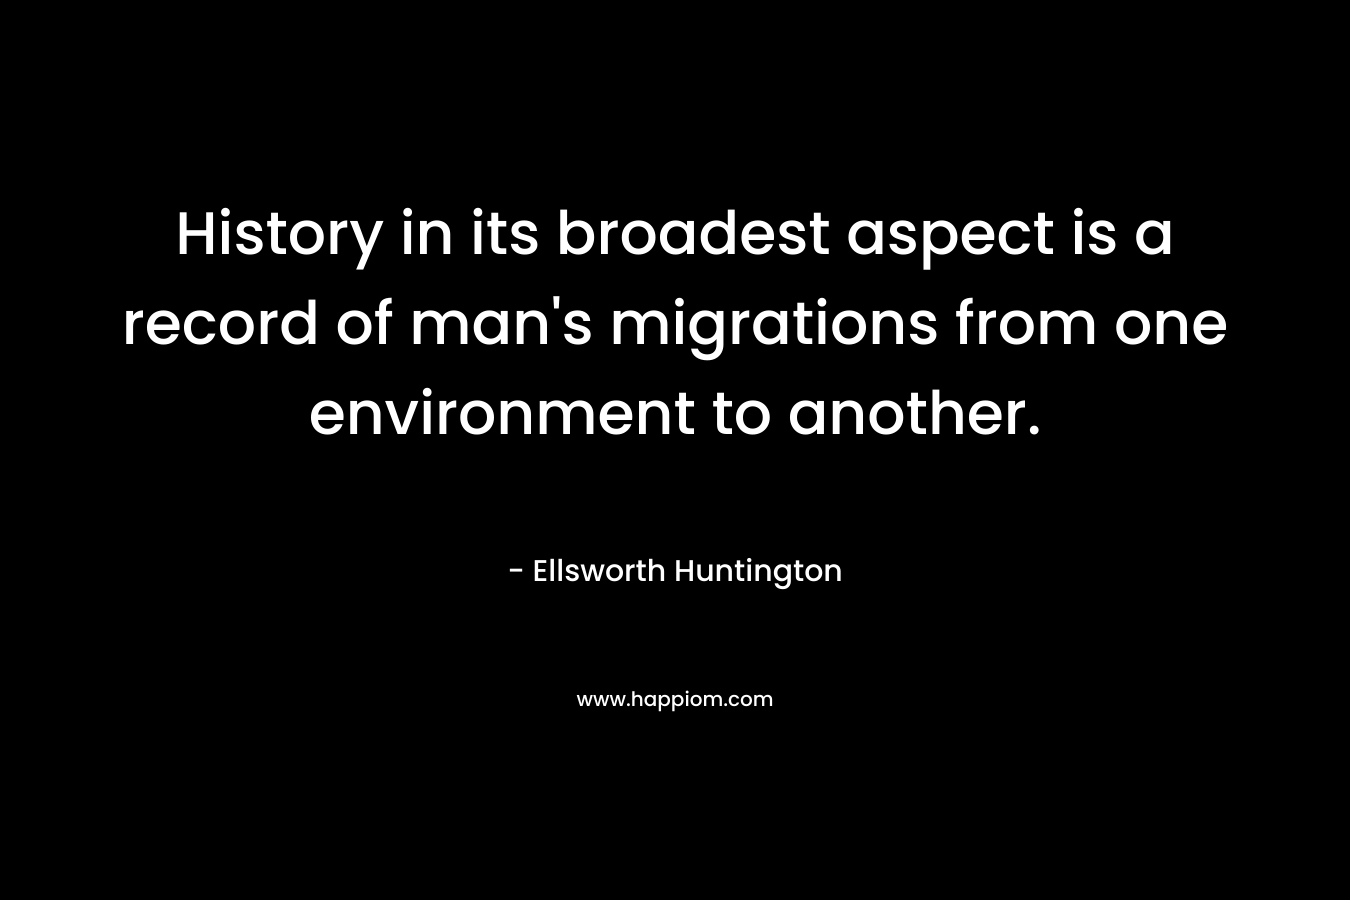 History in its broadest aspect is a record of man's migrations from one environment to another.